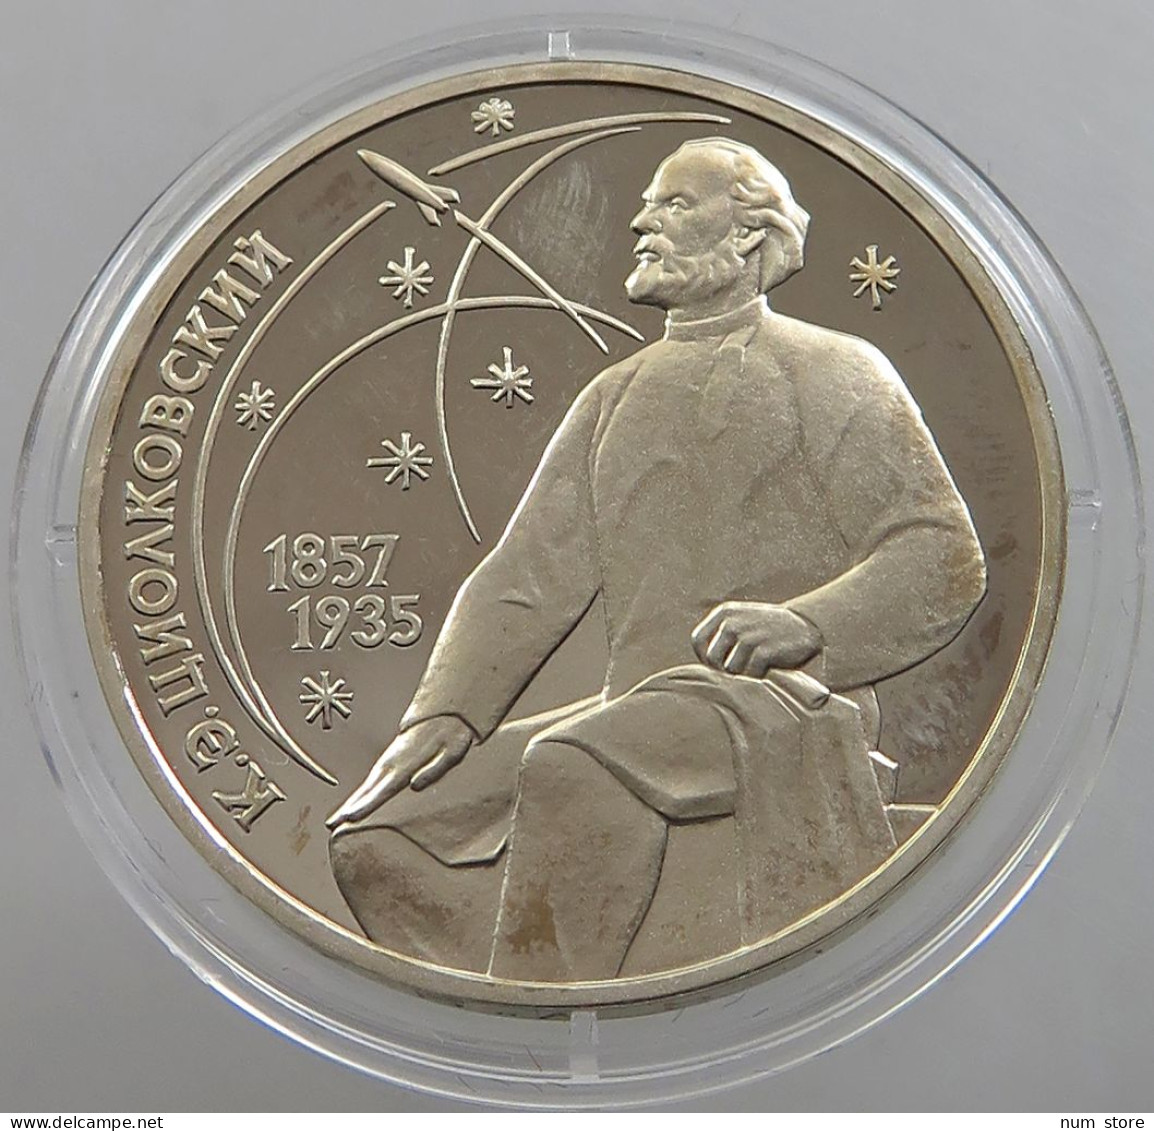 RUSSIA USSR 1 ROUBLE 1987 Tsiolkovsky PROOF #sm14 0643 - Rusland